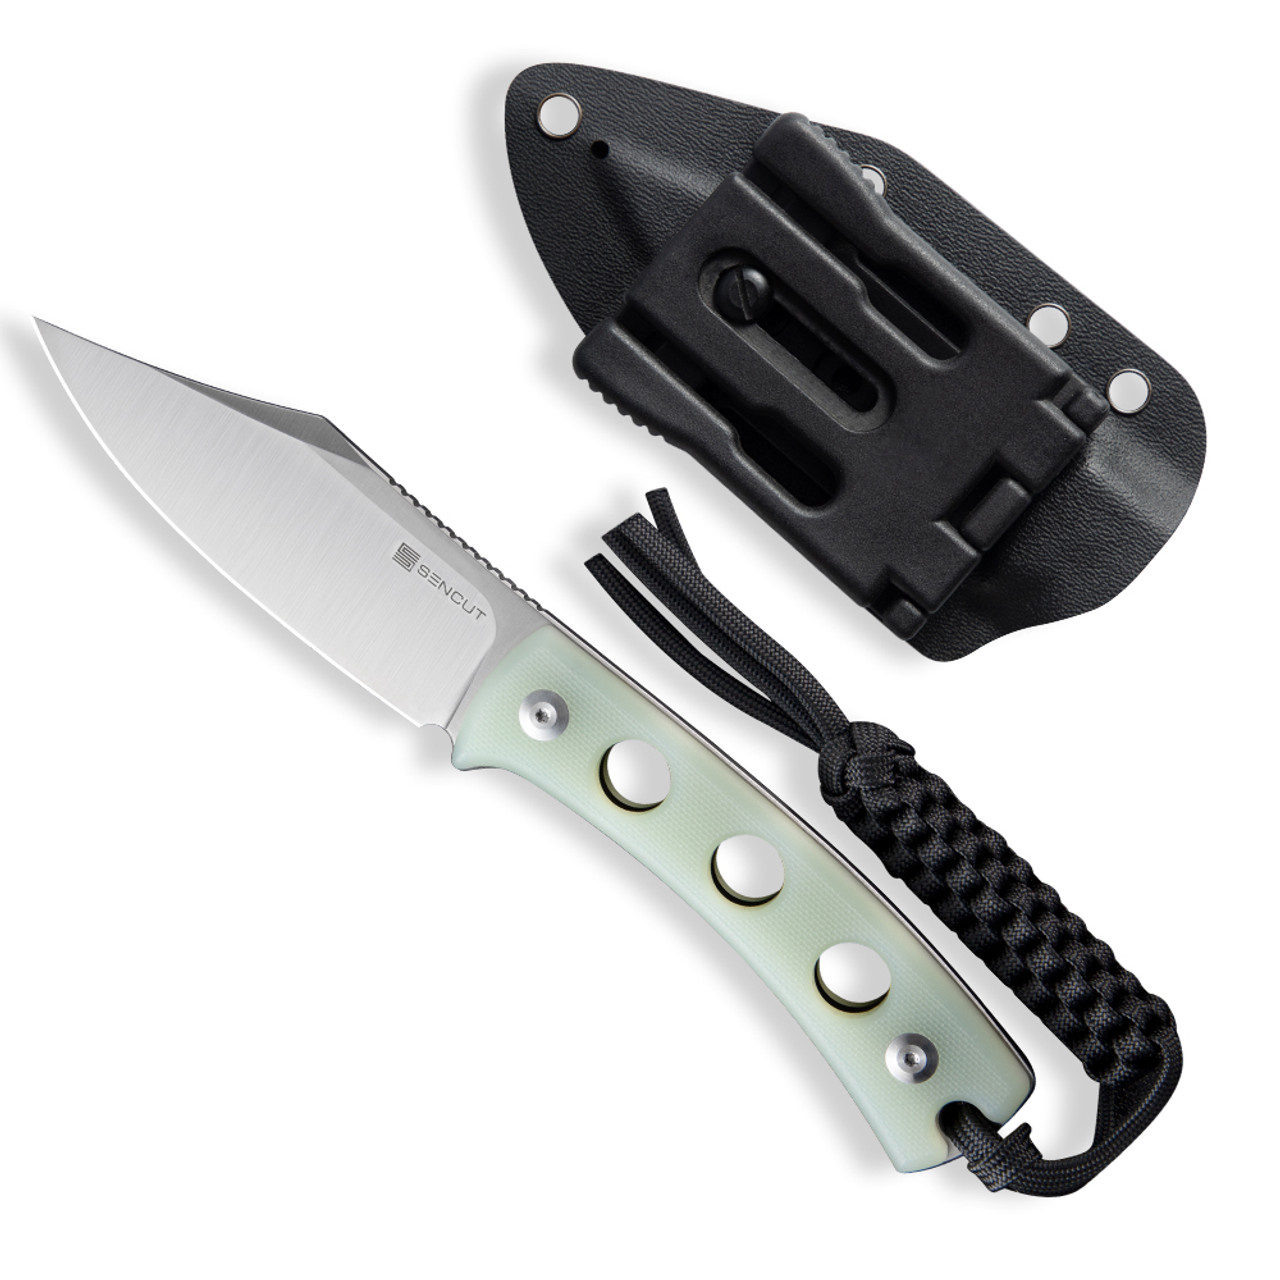 product image for Sencut Waxahachie Fixed Blade Knife Stainless Steel Black G10 Handle SA11B